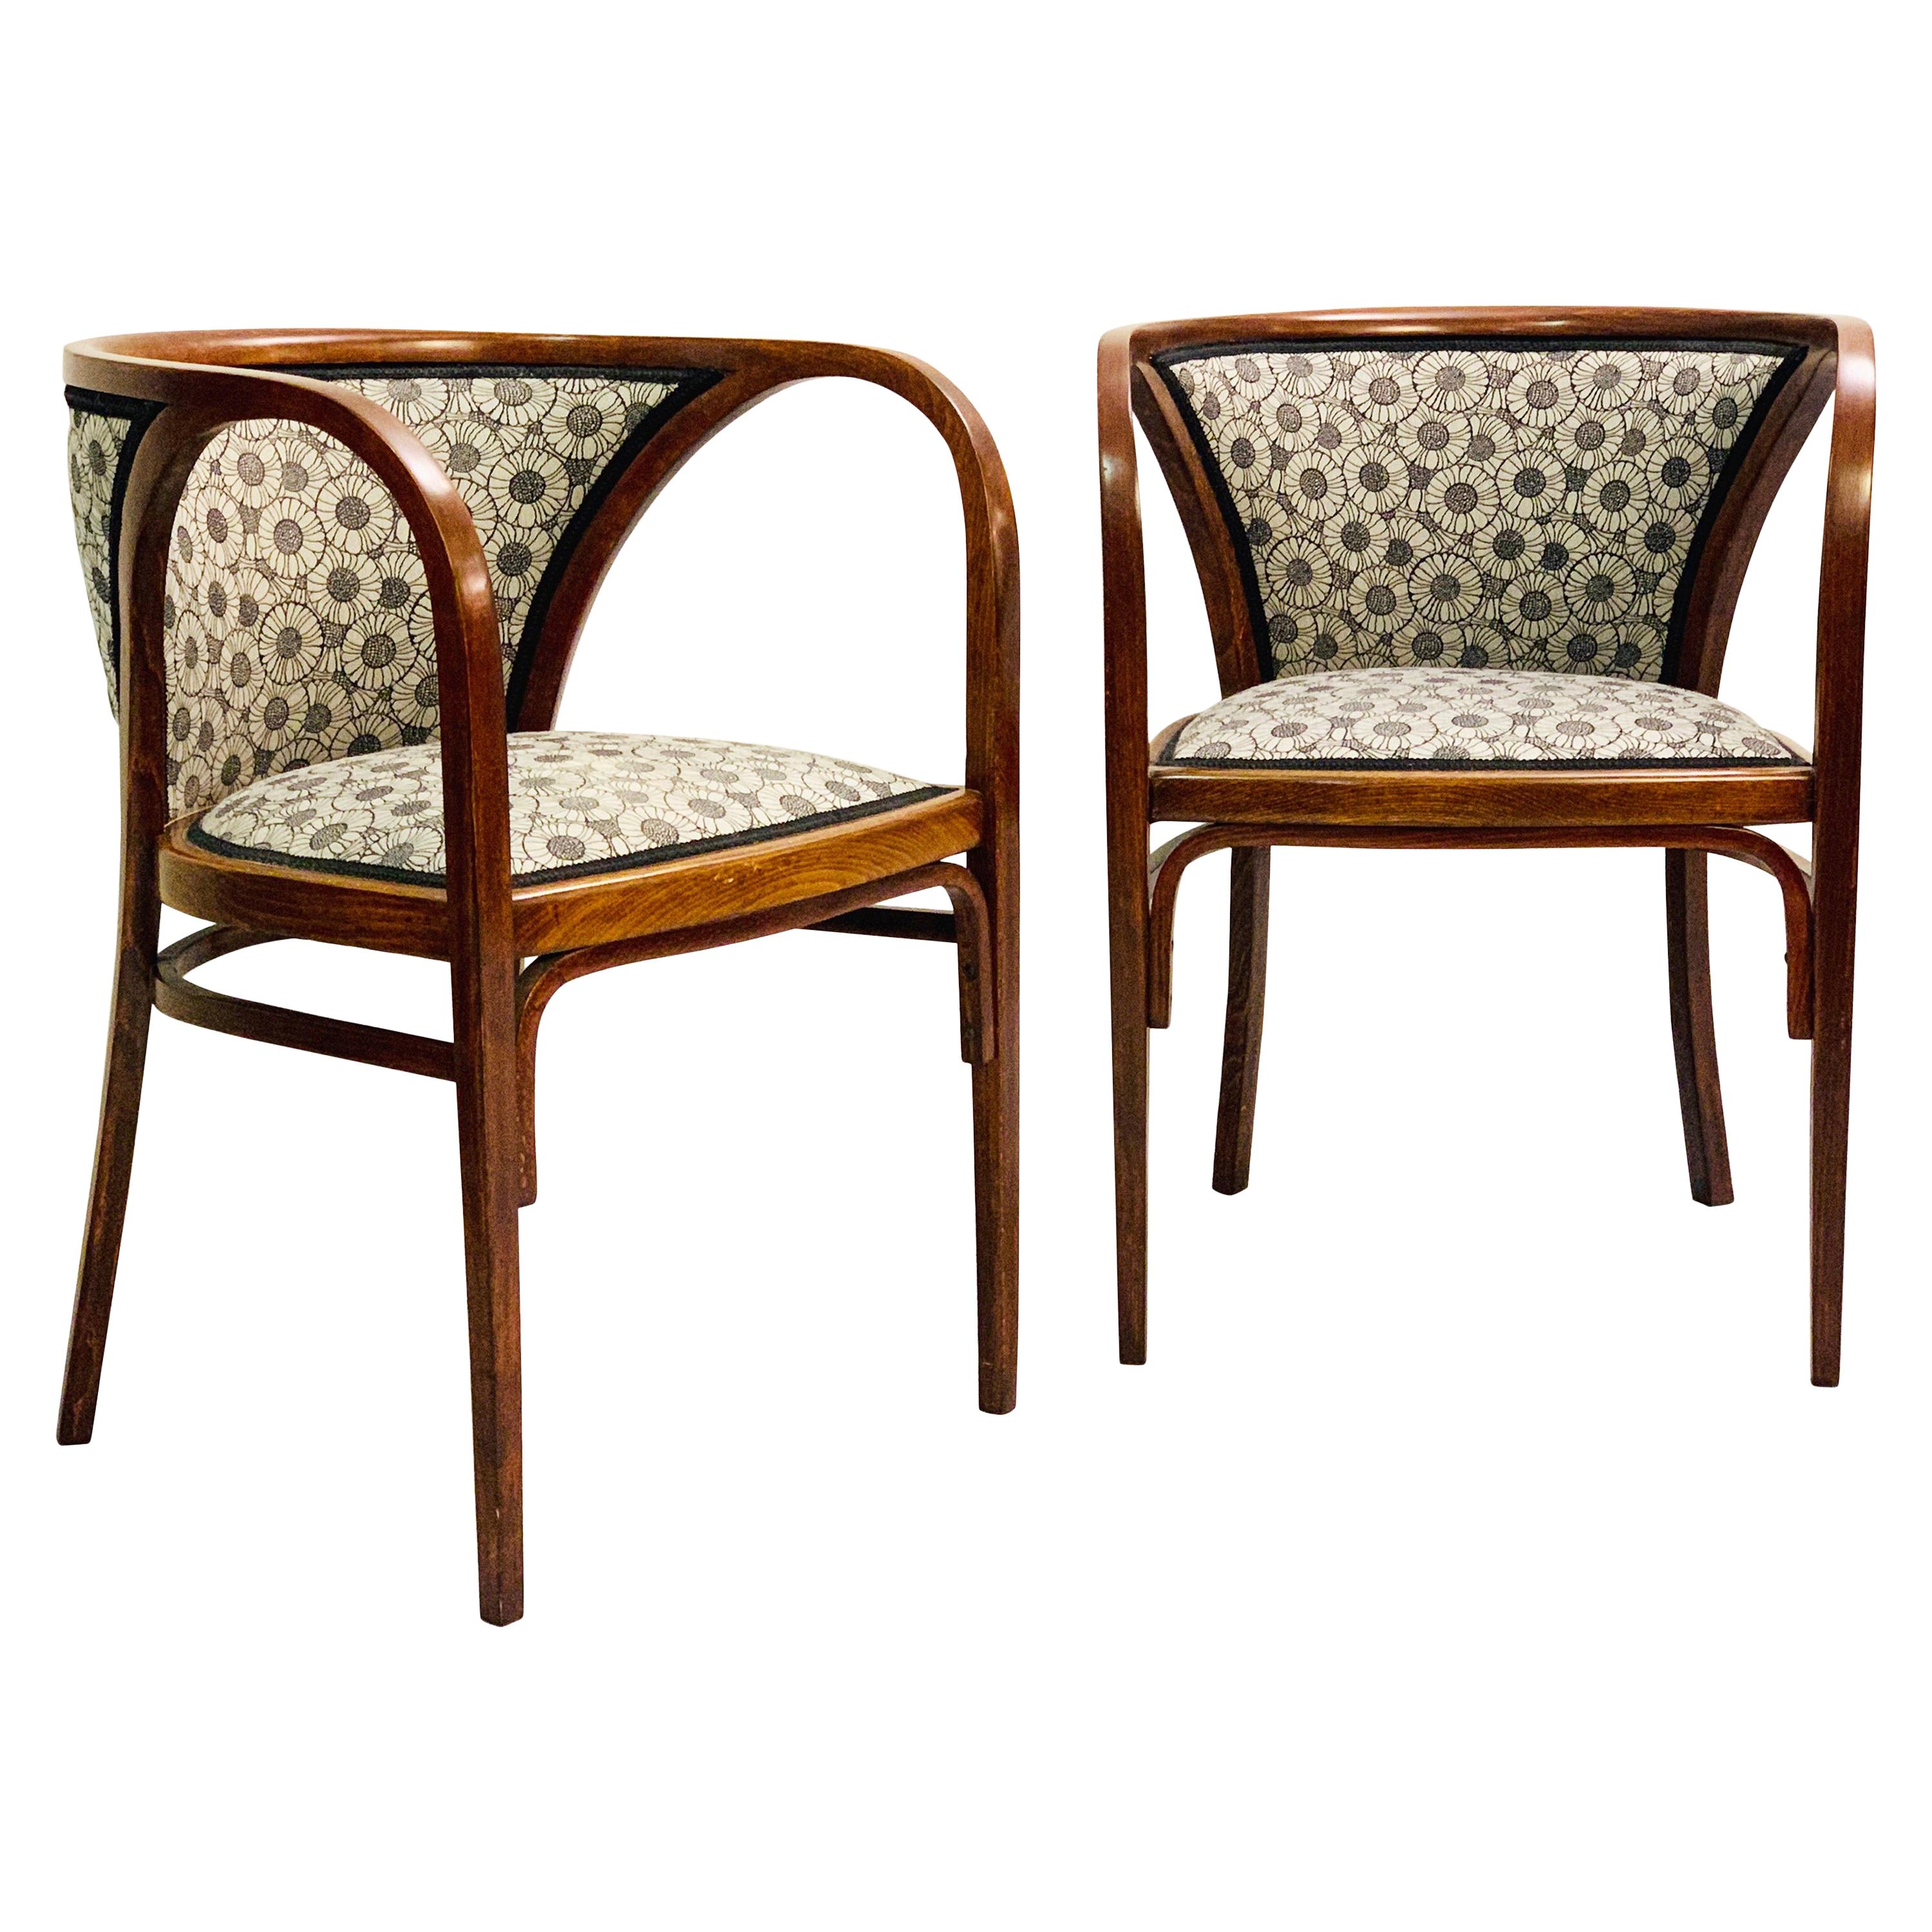 Pair of Armchairs by Marcel Kammerer, Austria, 1905